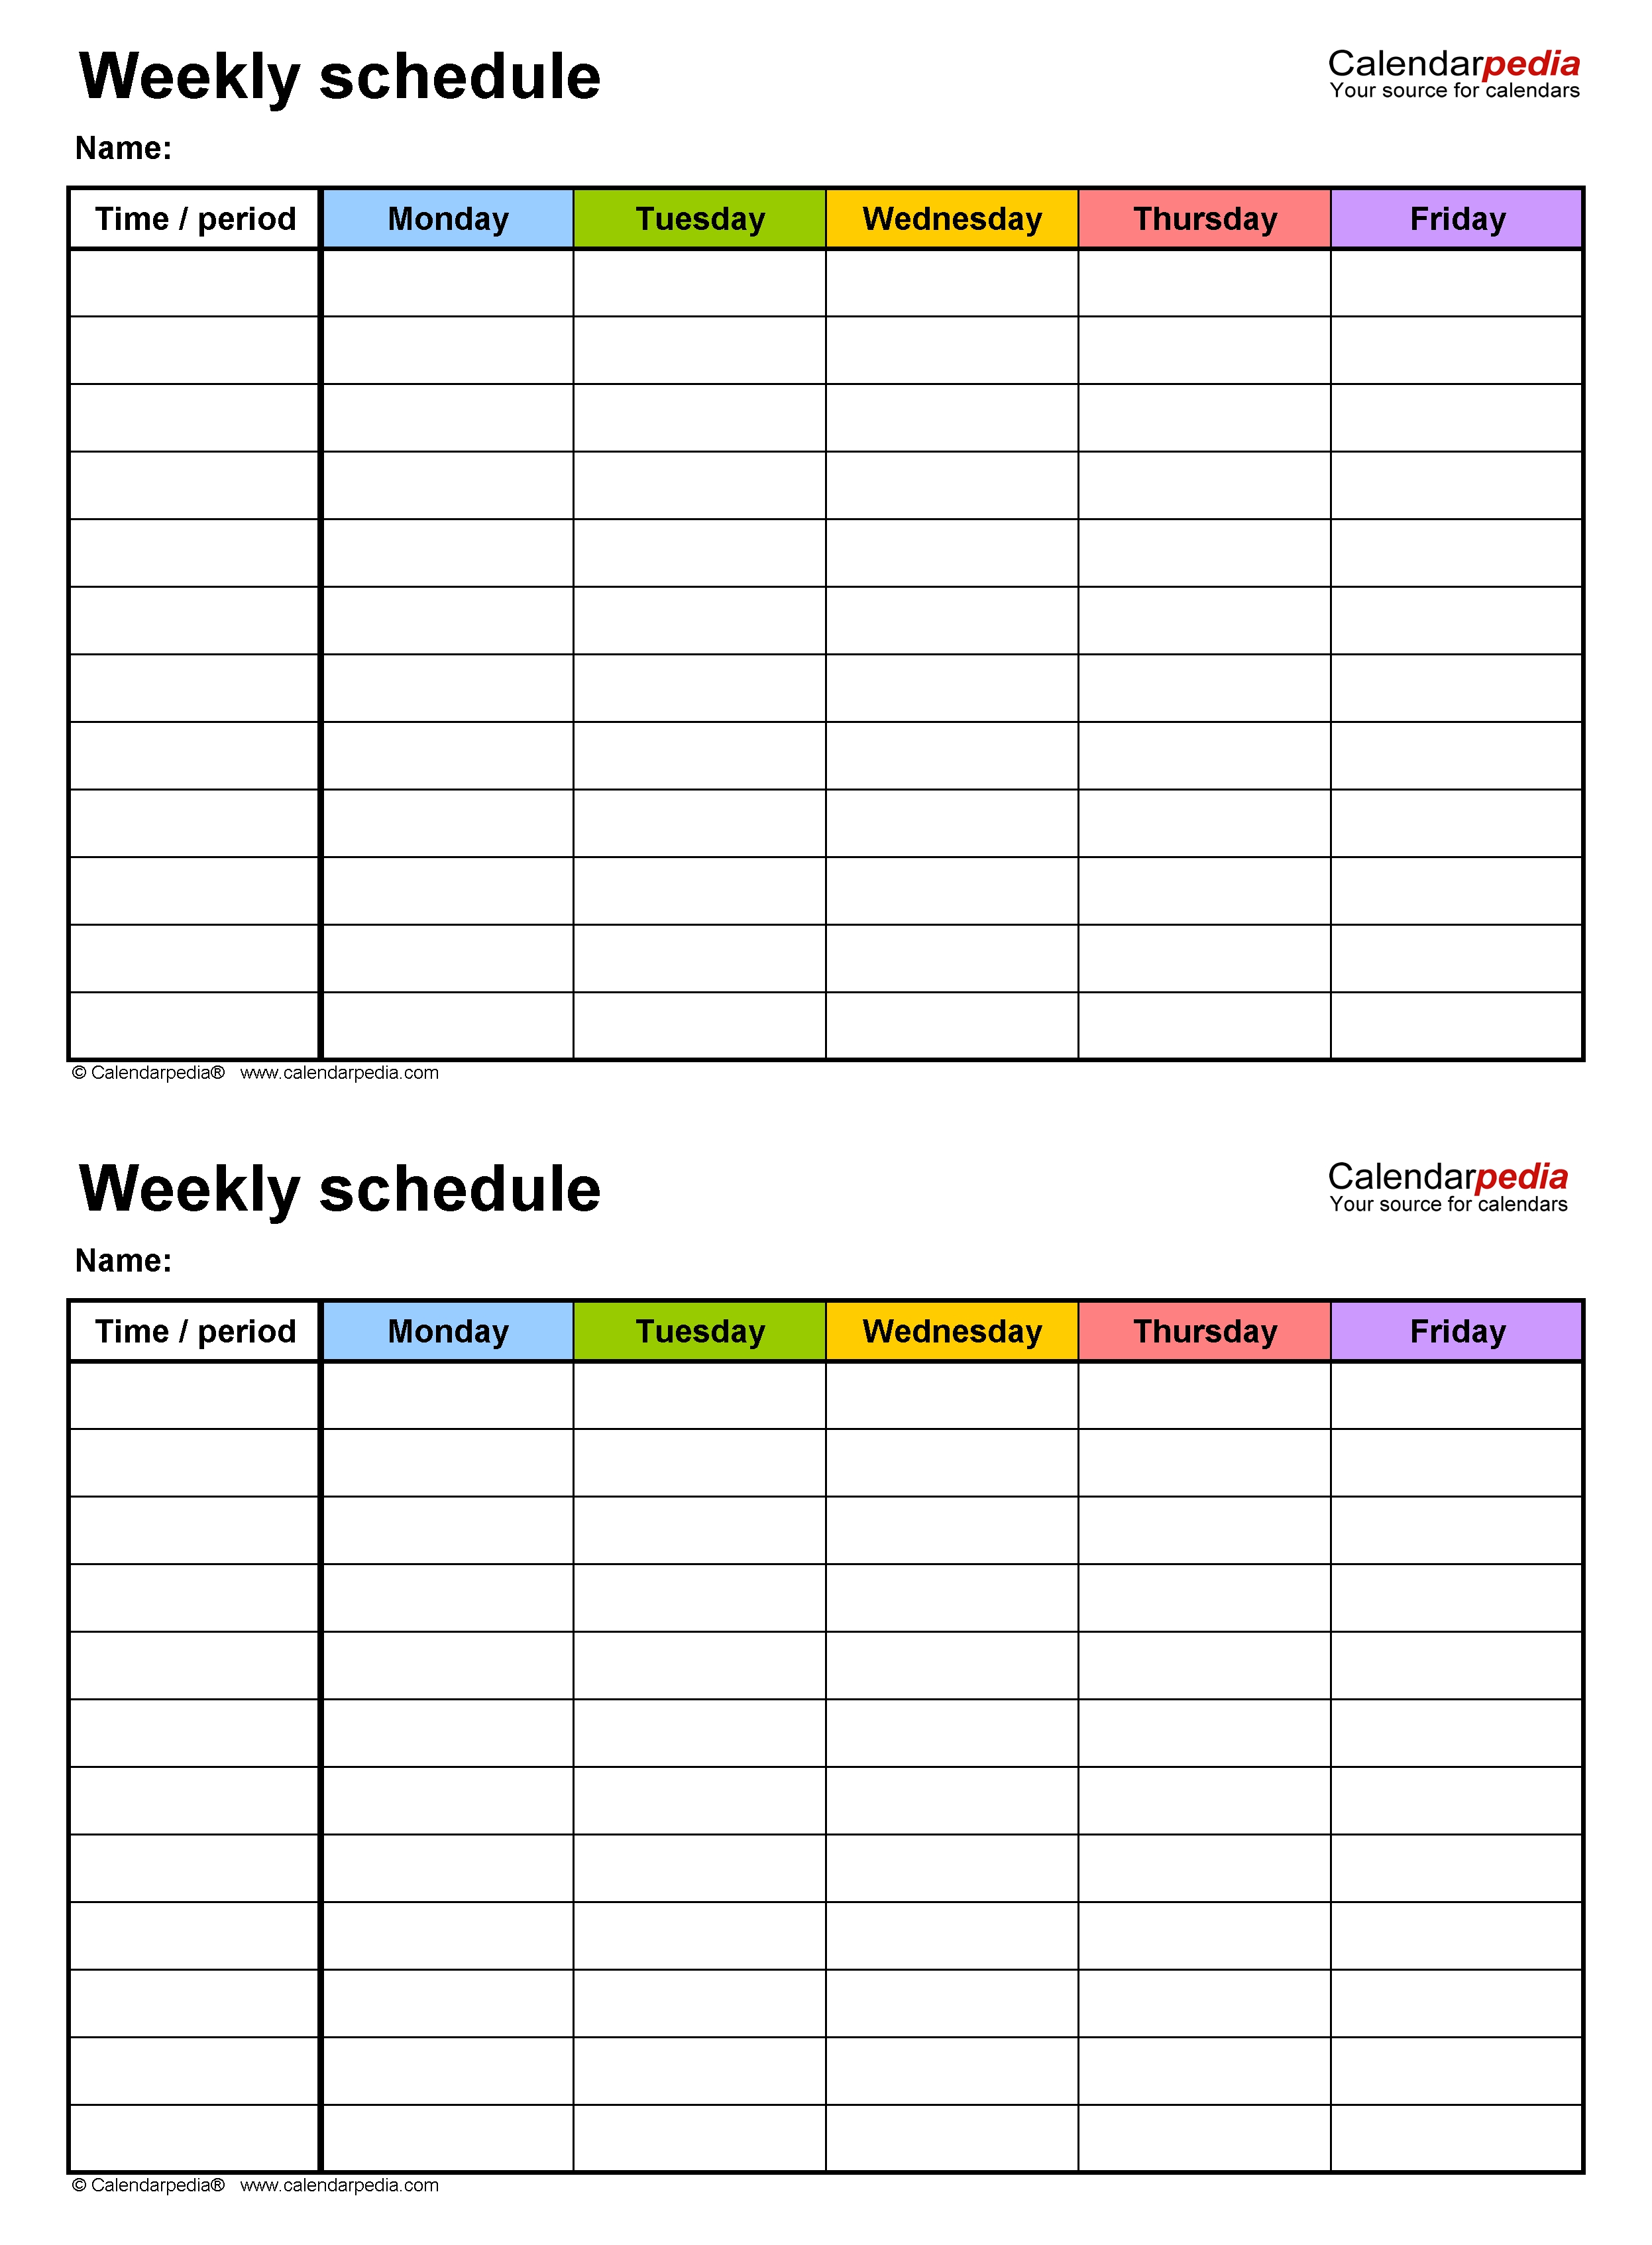 Free Weekly Schedule Templates For Word - 18 Templates  7 Day Weekly Chart Printable